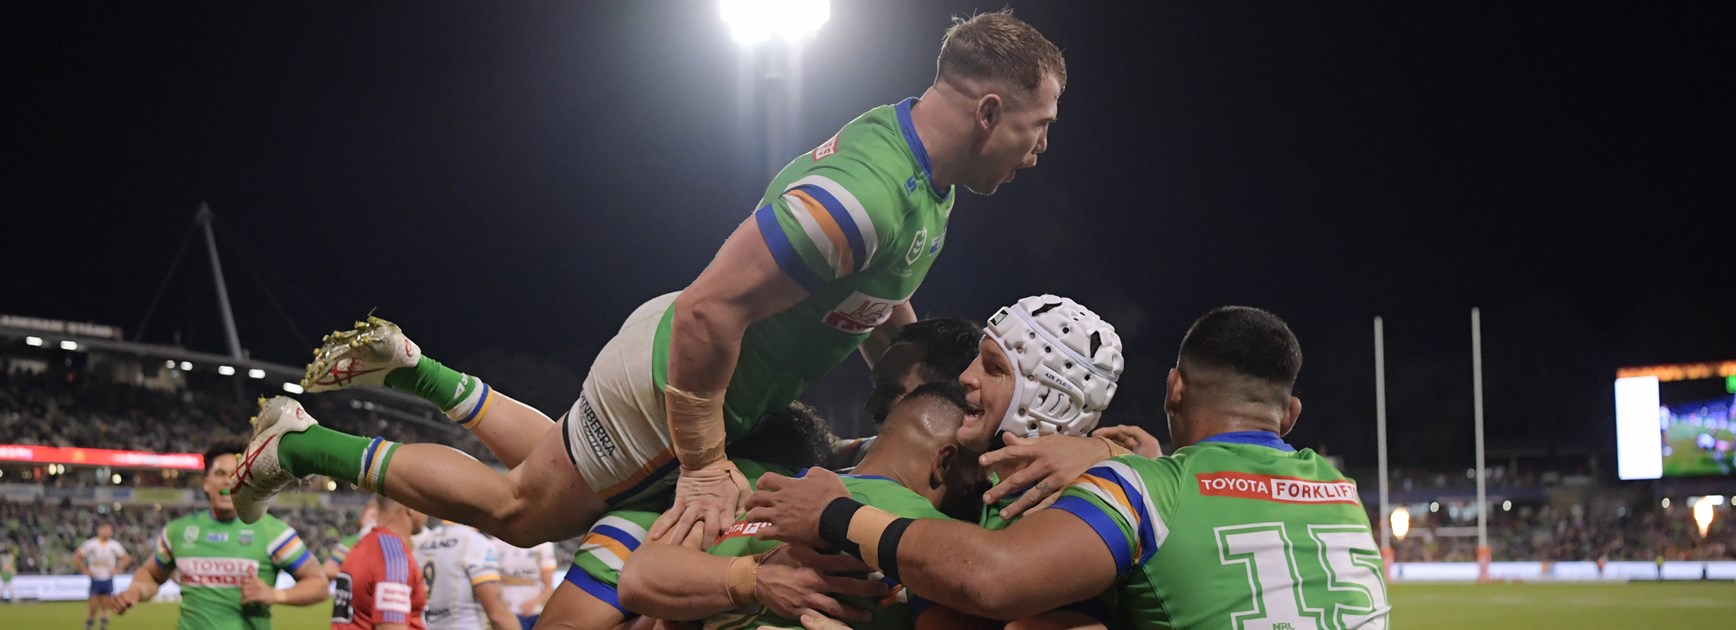 Canberra clinical as Raiders roll on to fifth straight win